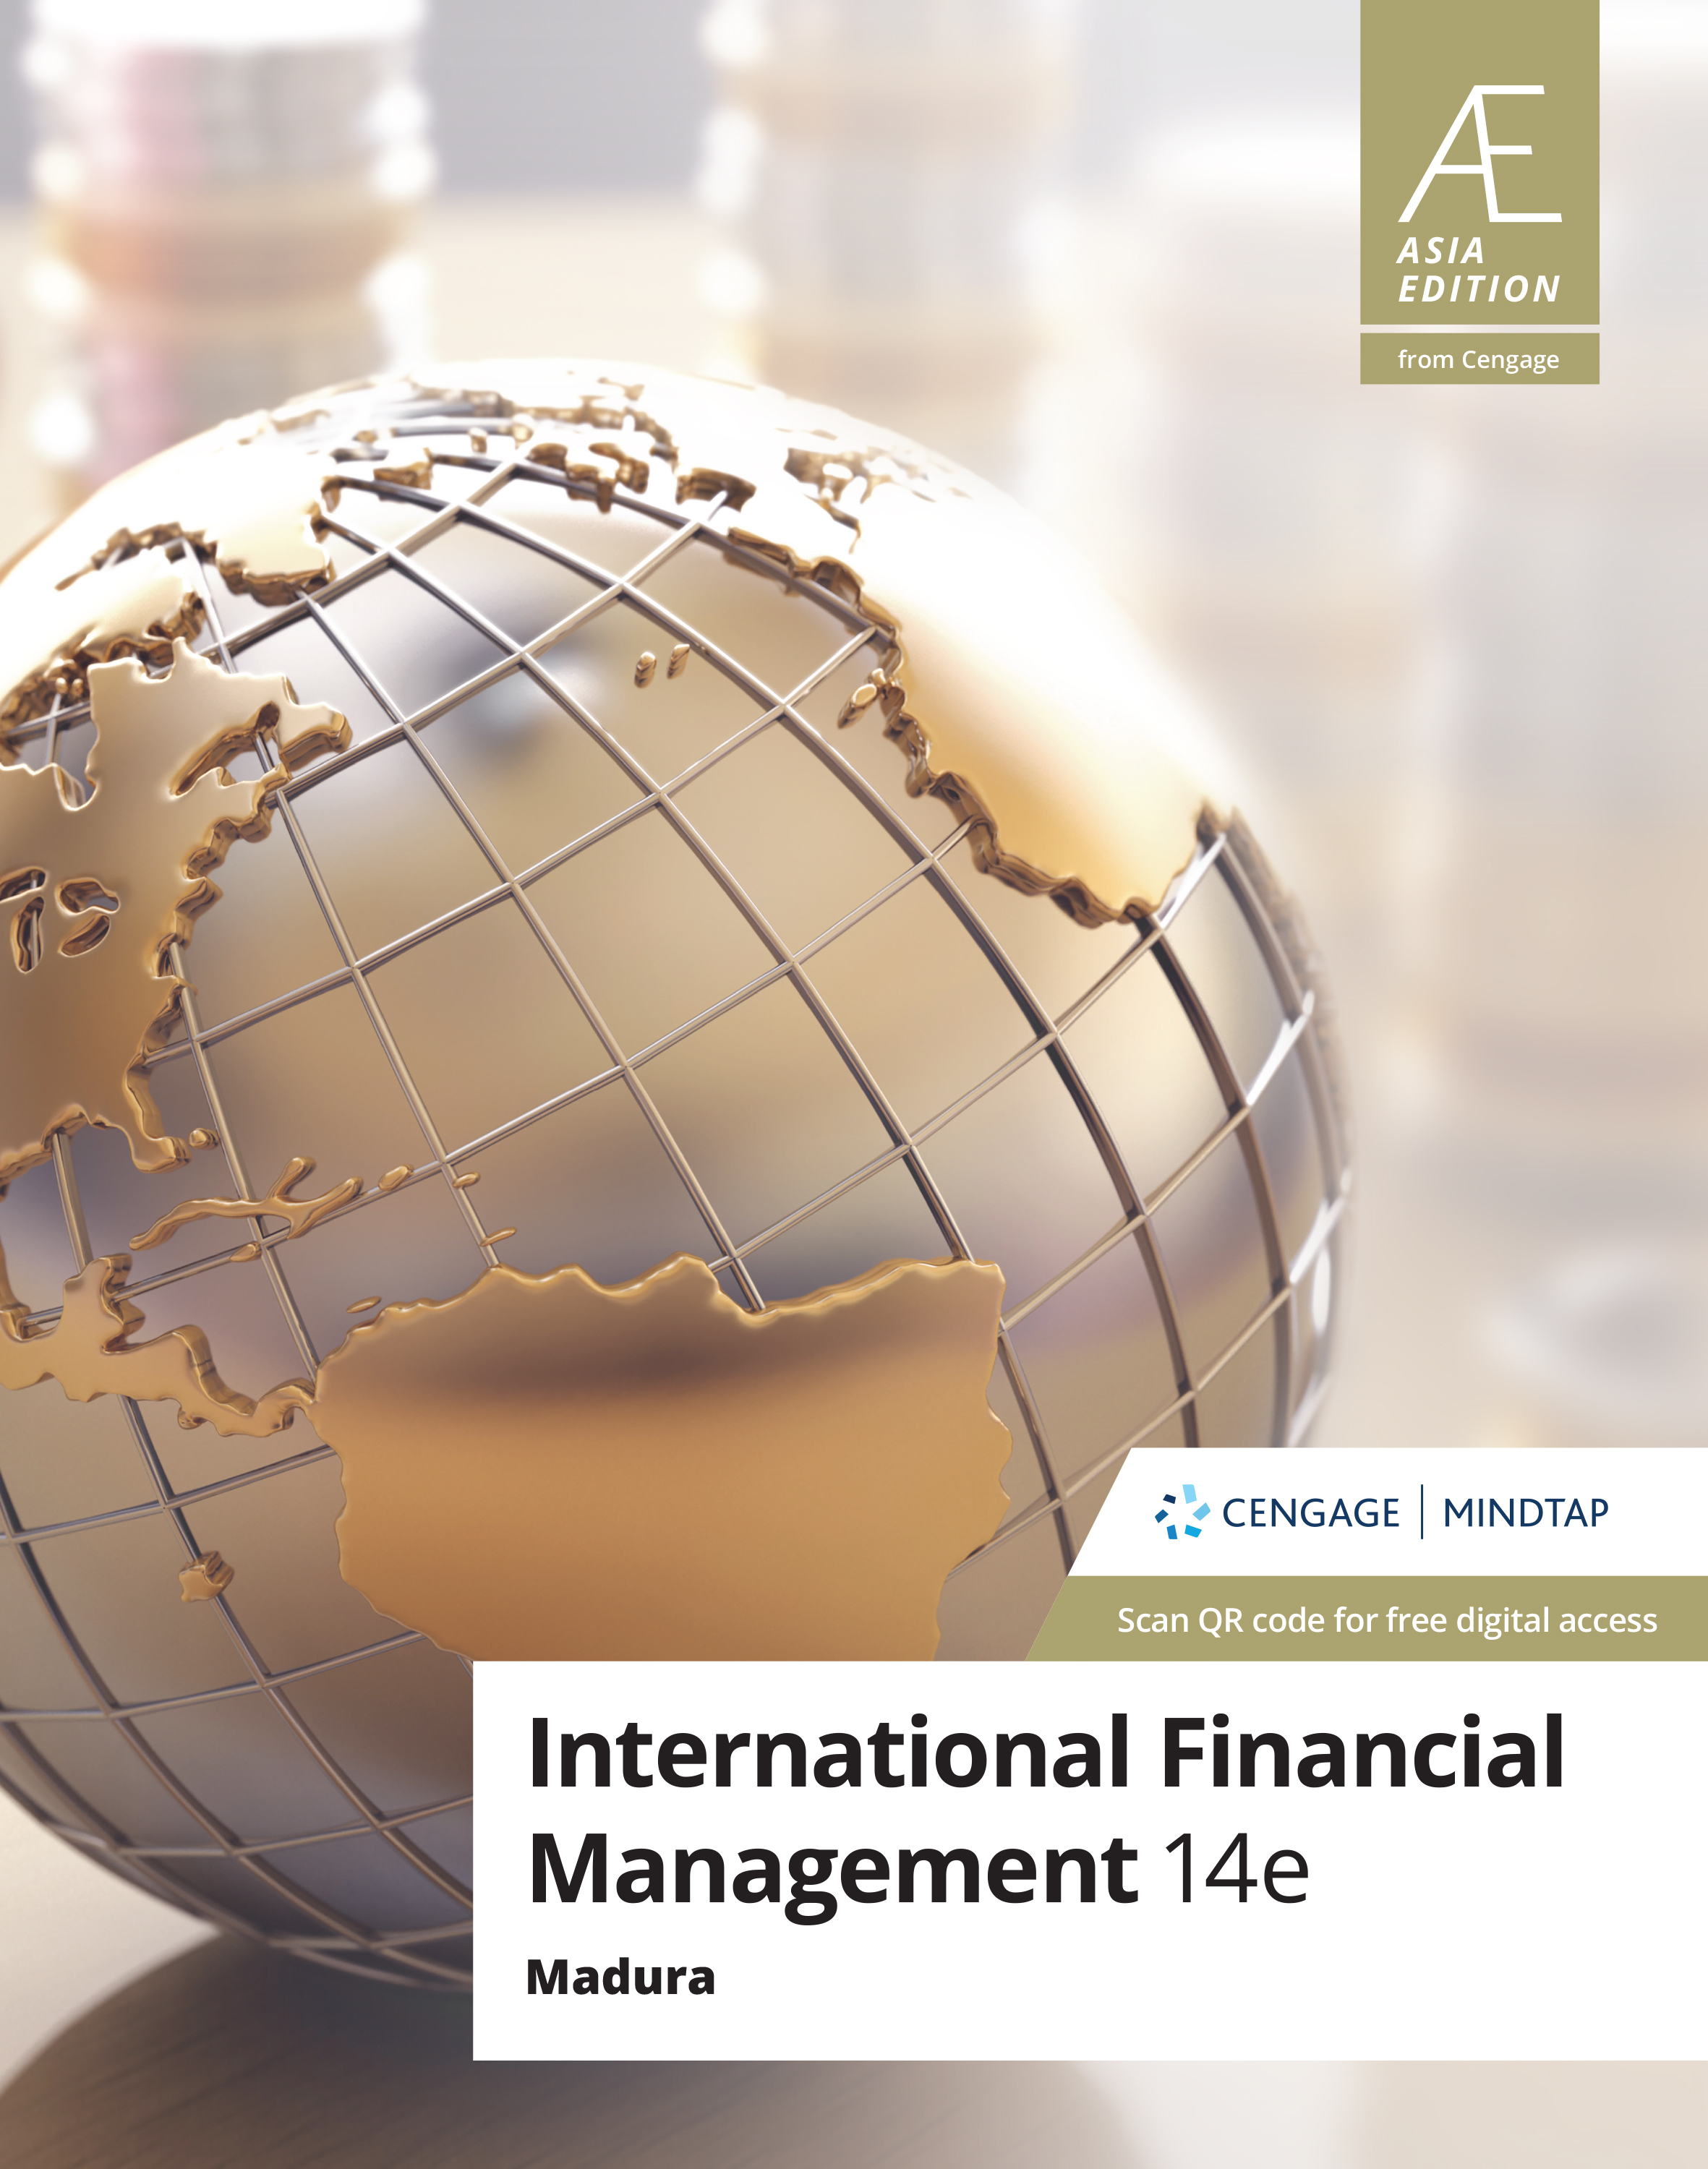 International Financial Management Asia Edition (OR), ISBN: 9789814915007